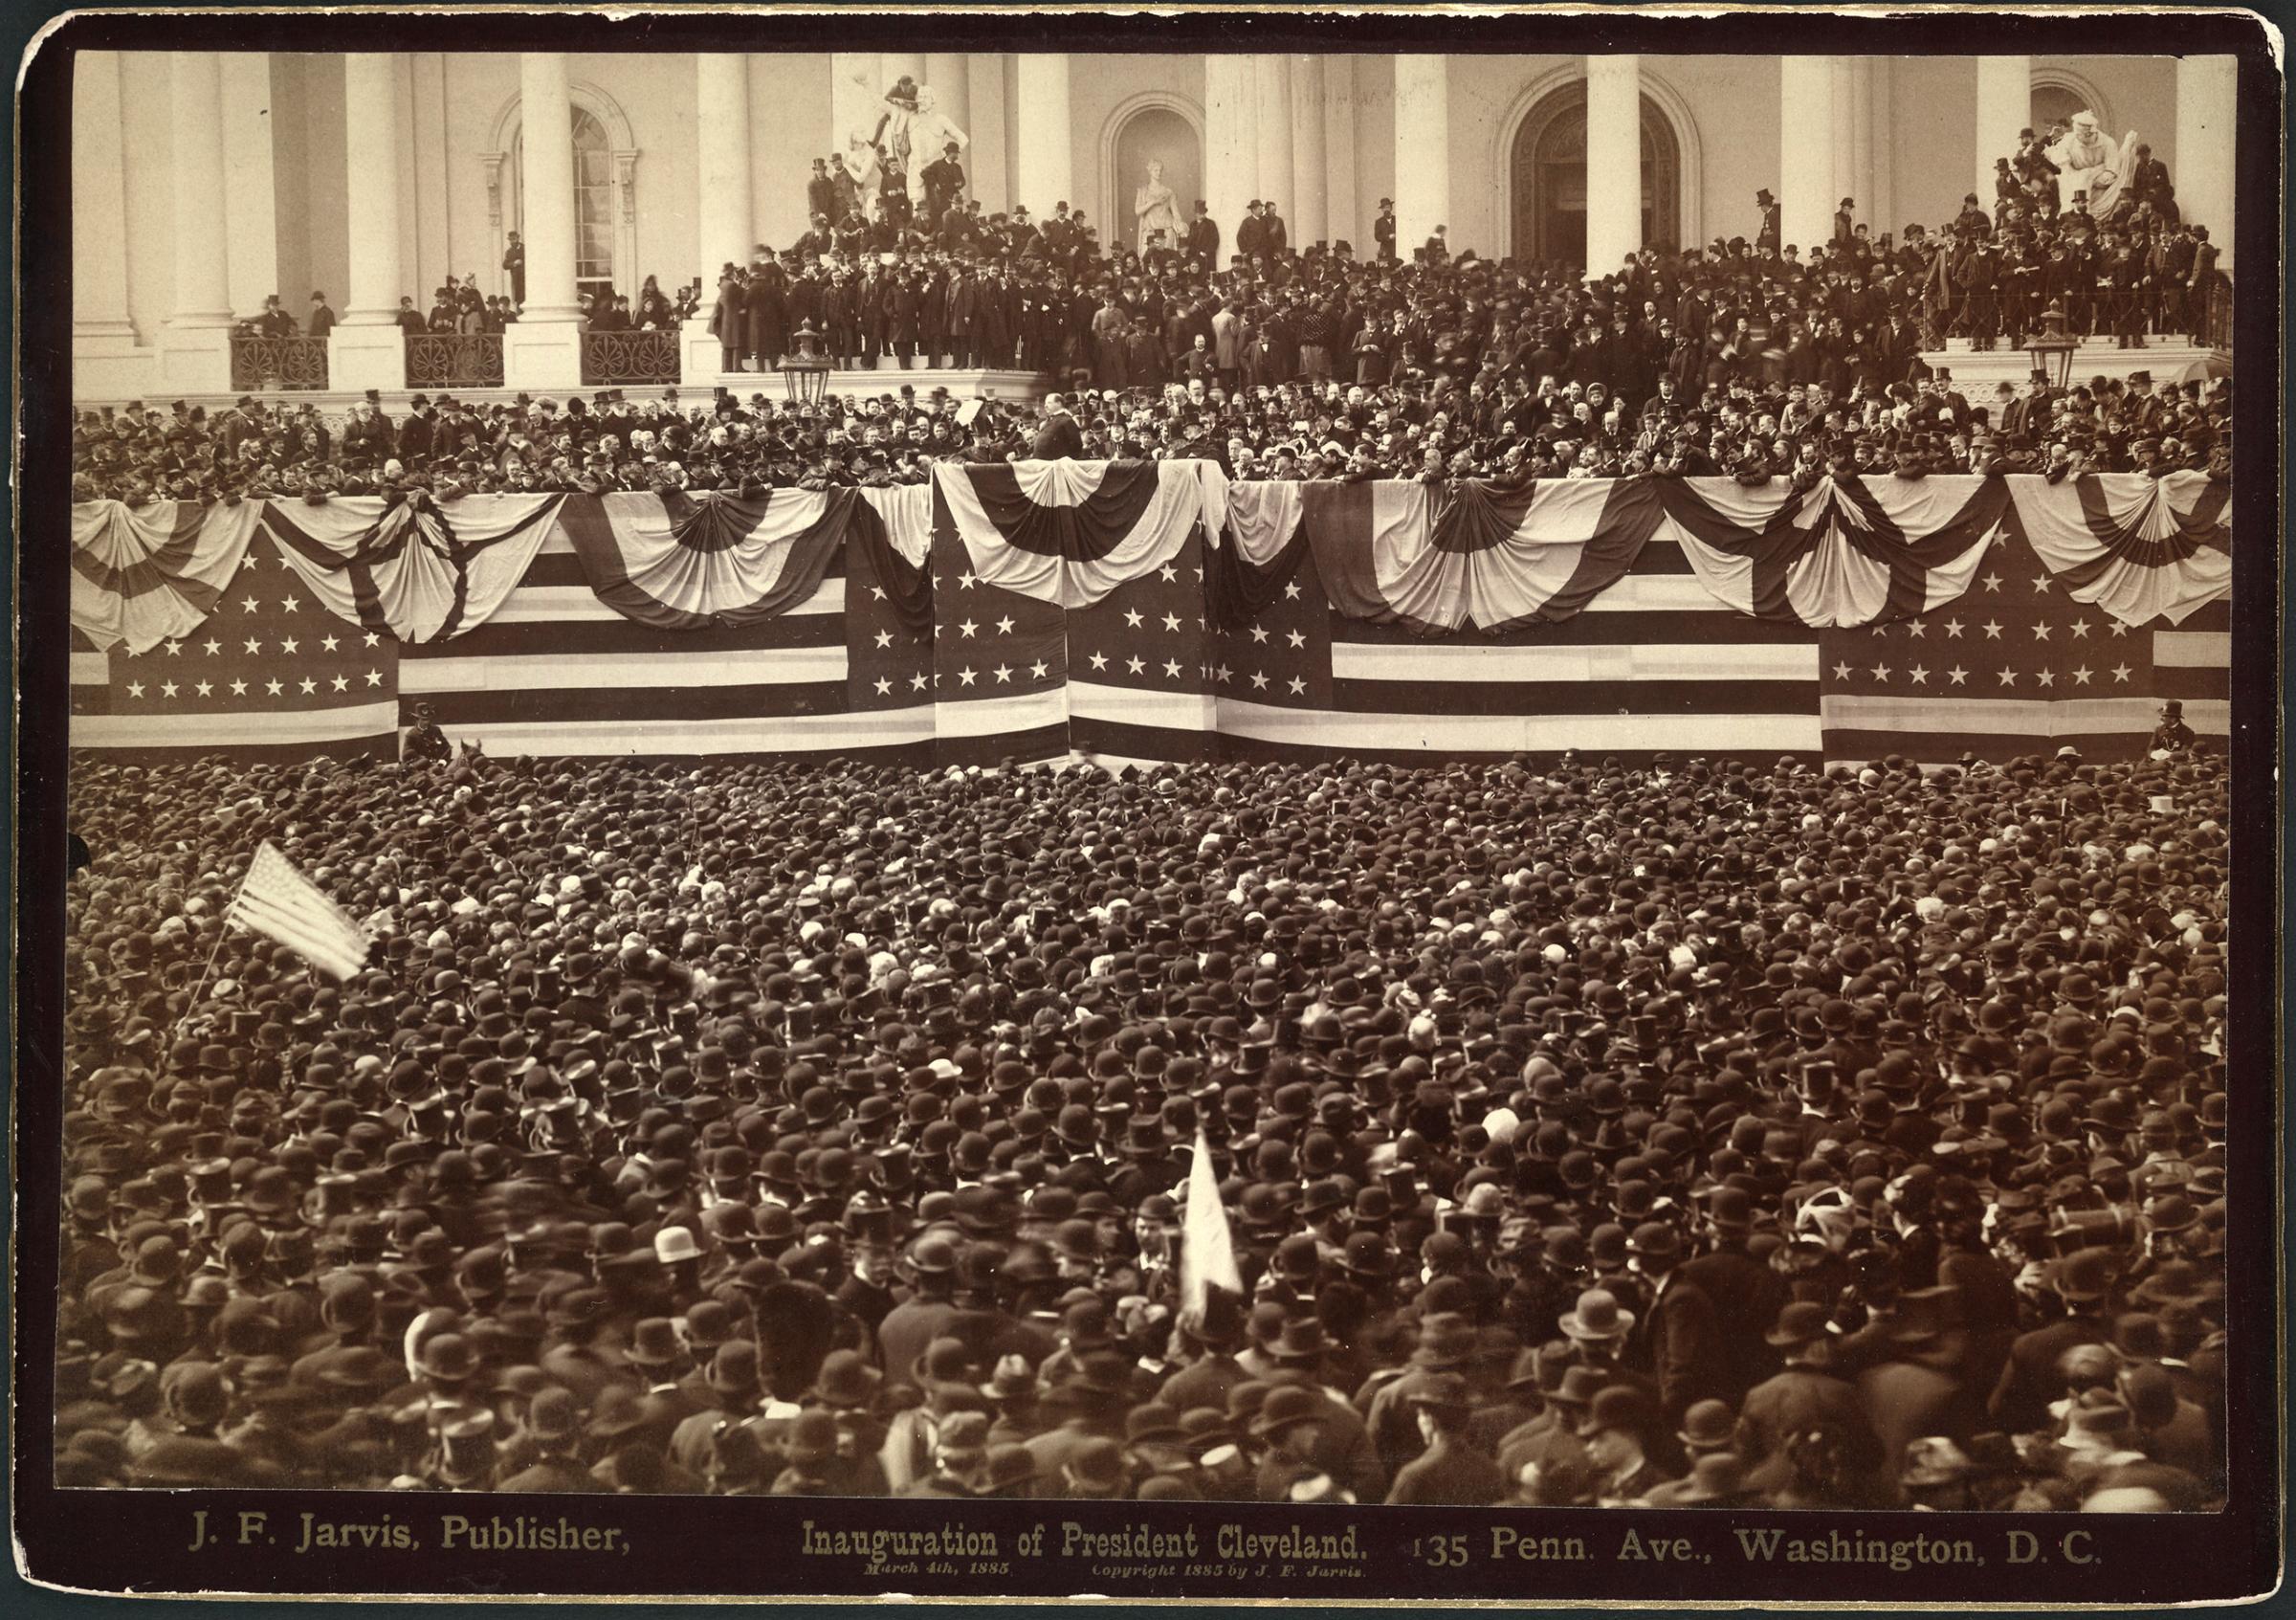 Grover Cleveland, delivering his inaugural address to crowd on east portico of U.S. Capitol at his first inauguration, 1885.